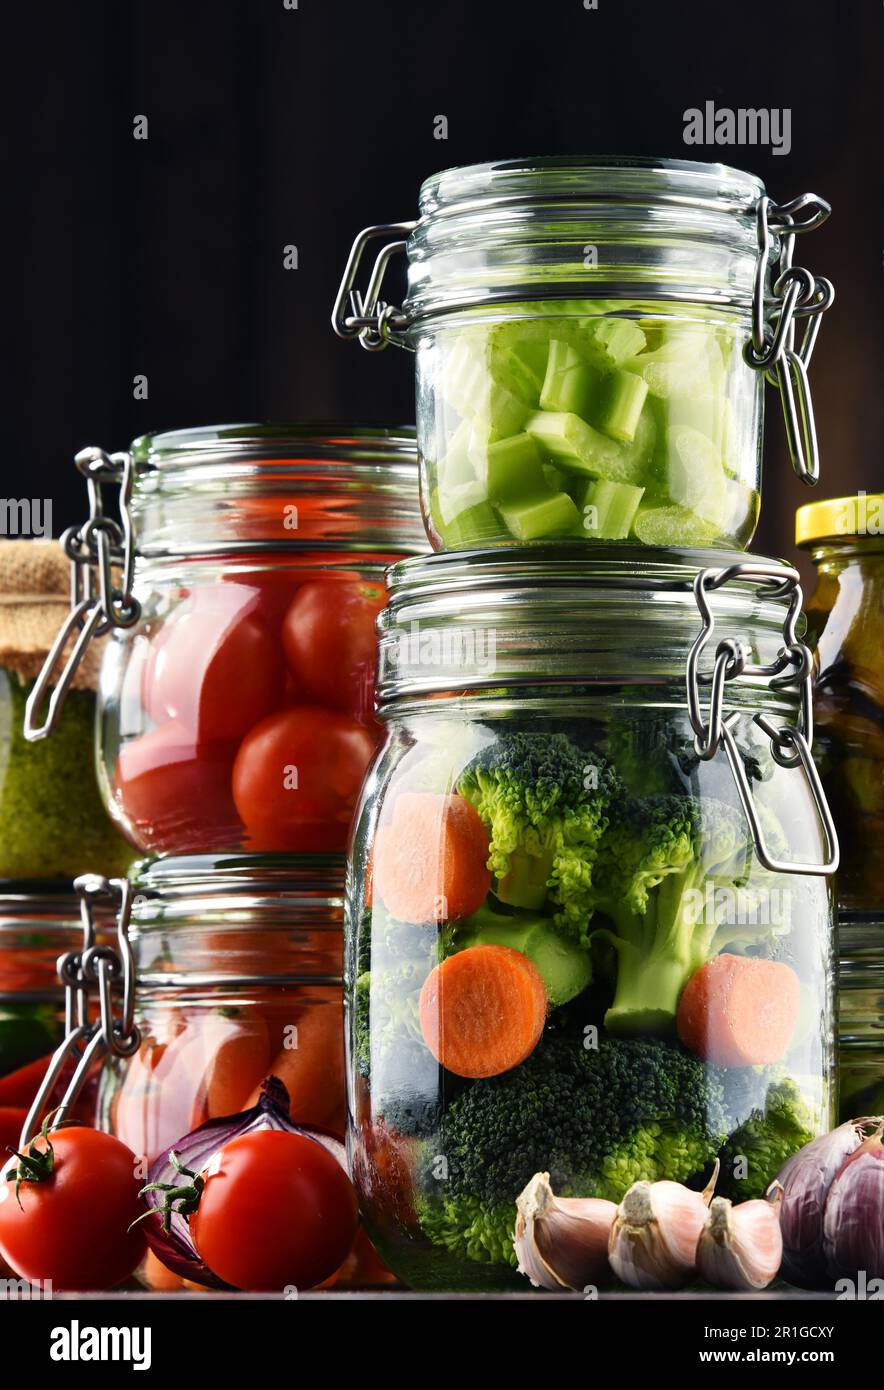 Jars with marinated food and organic raw vegetables Stock Photo